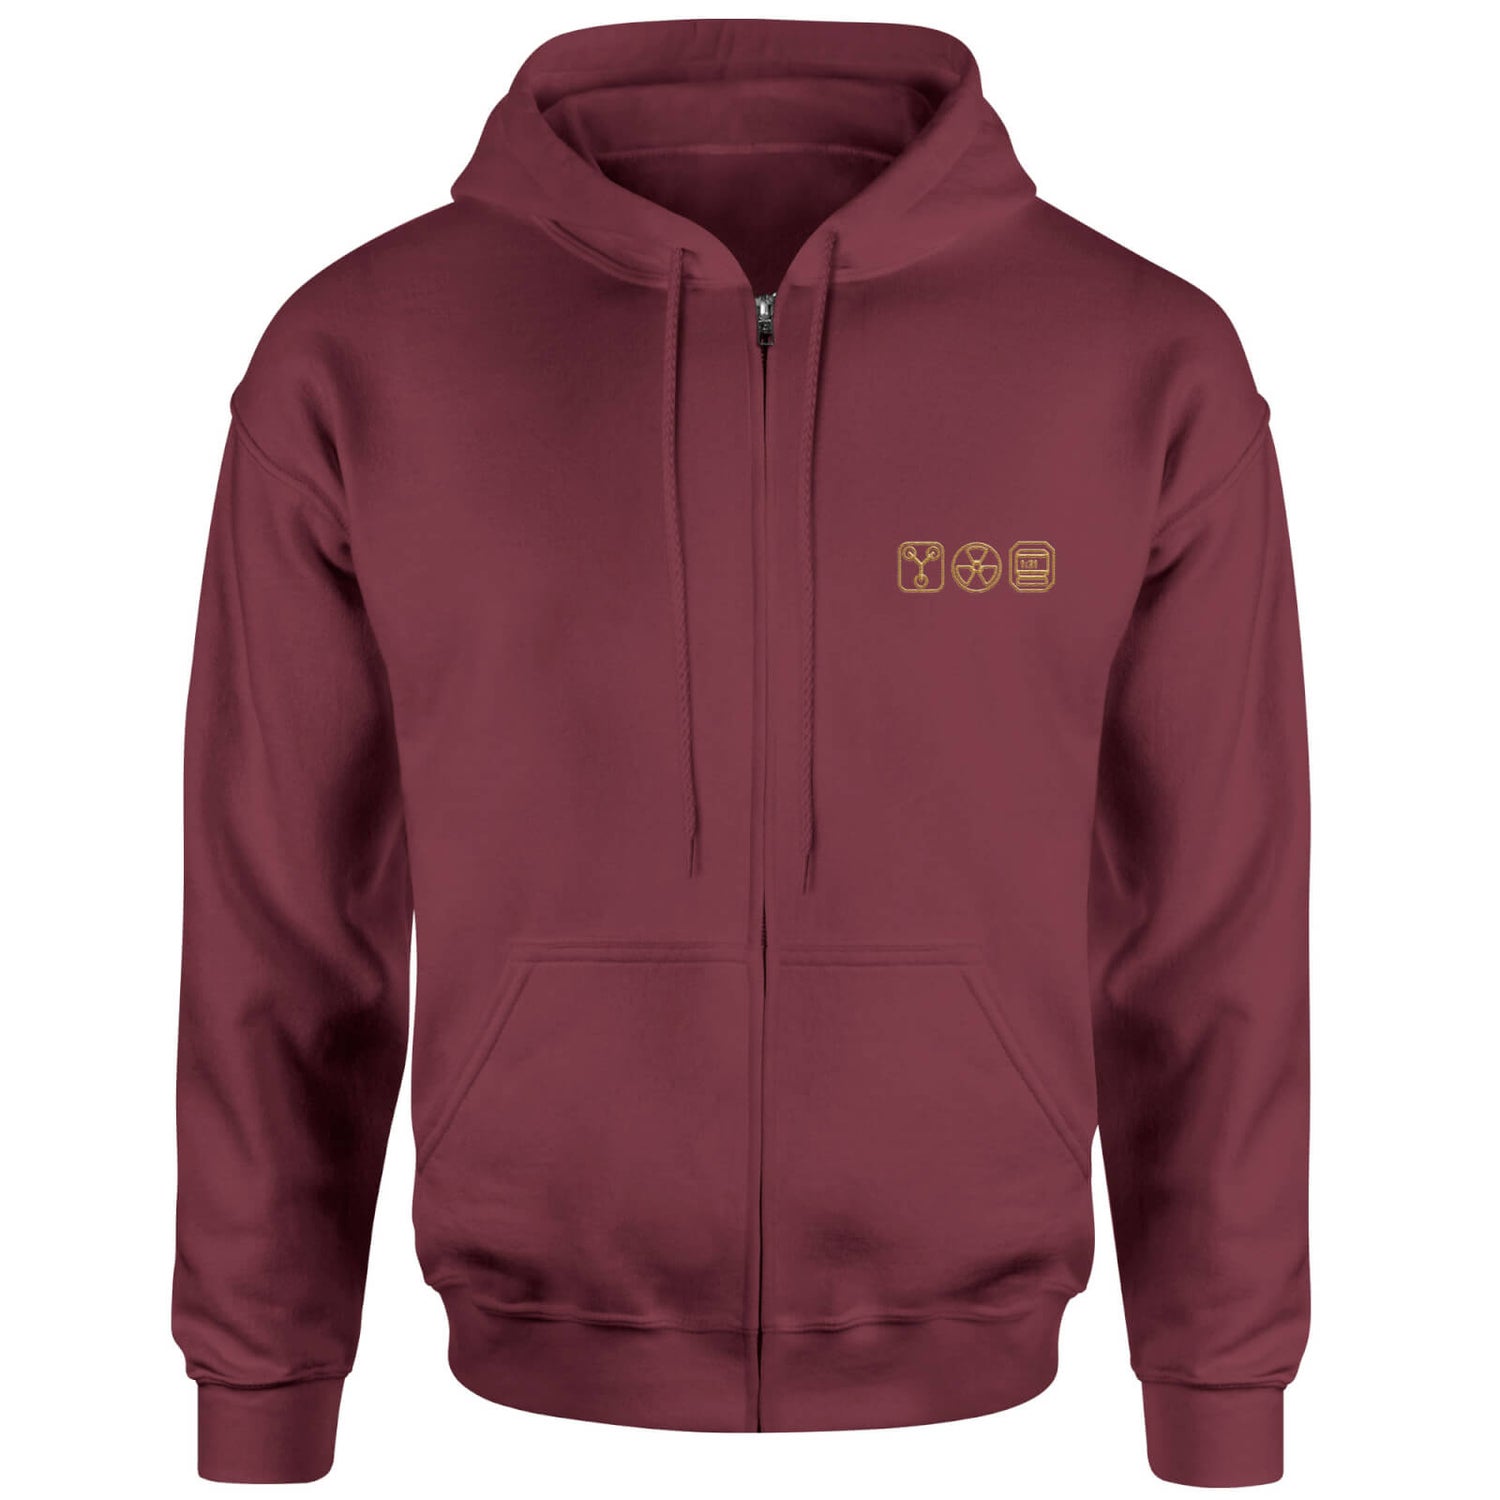 Back To The Future Icons Embroidered Unisex Zipped Hoodie - Burgundy